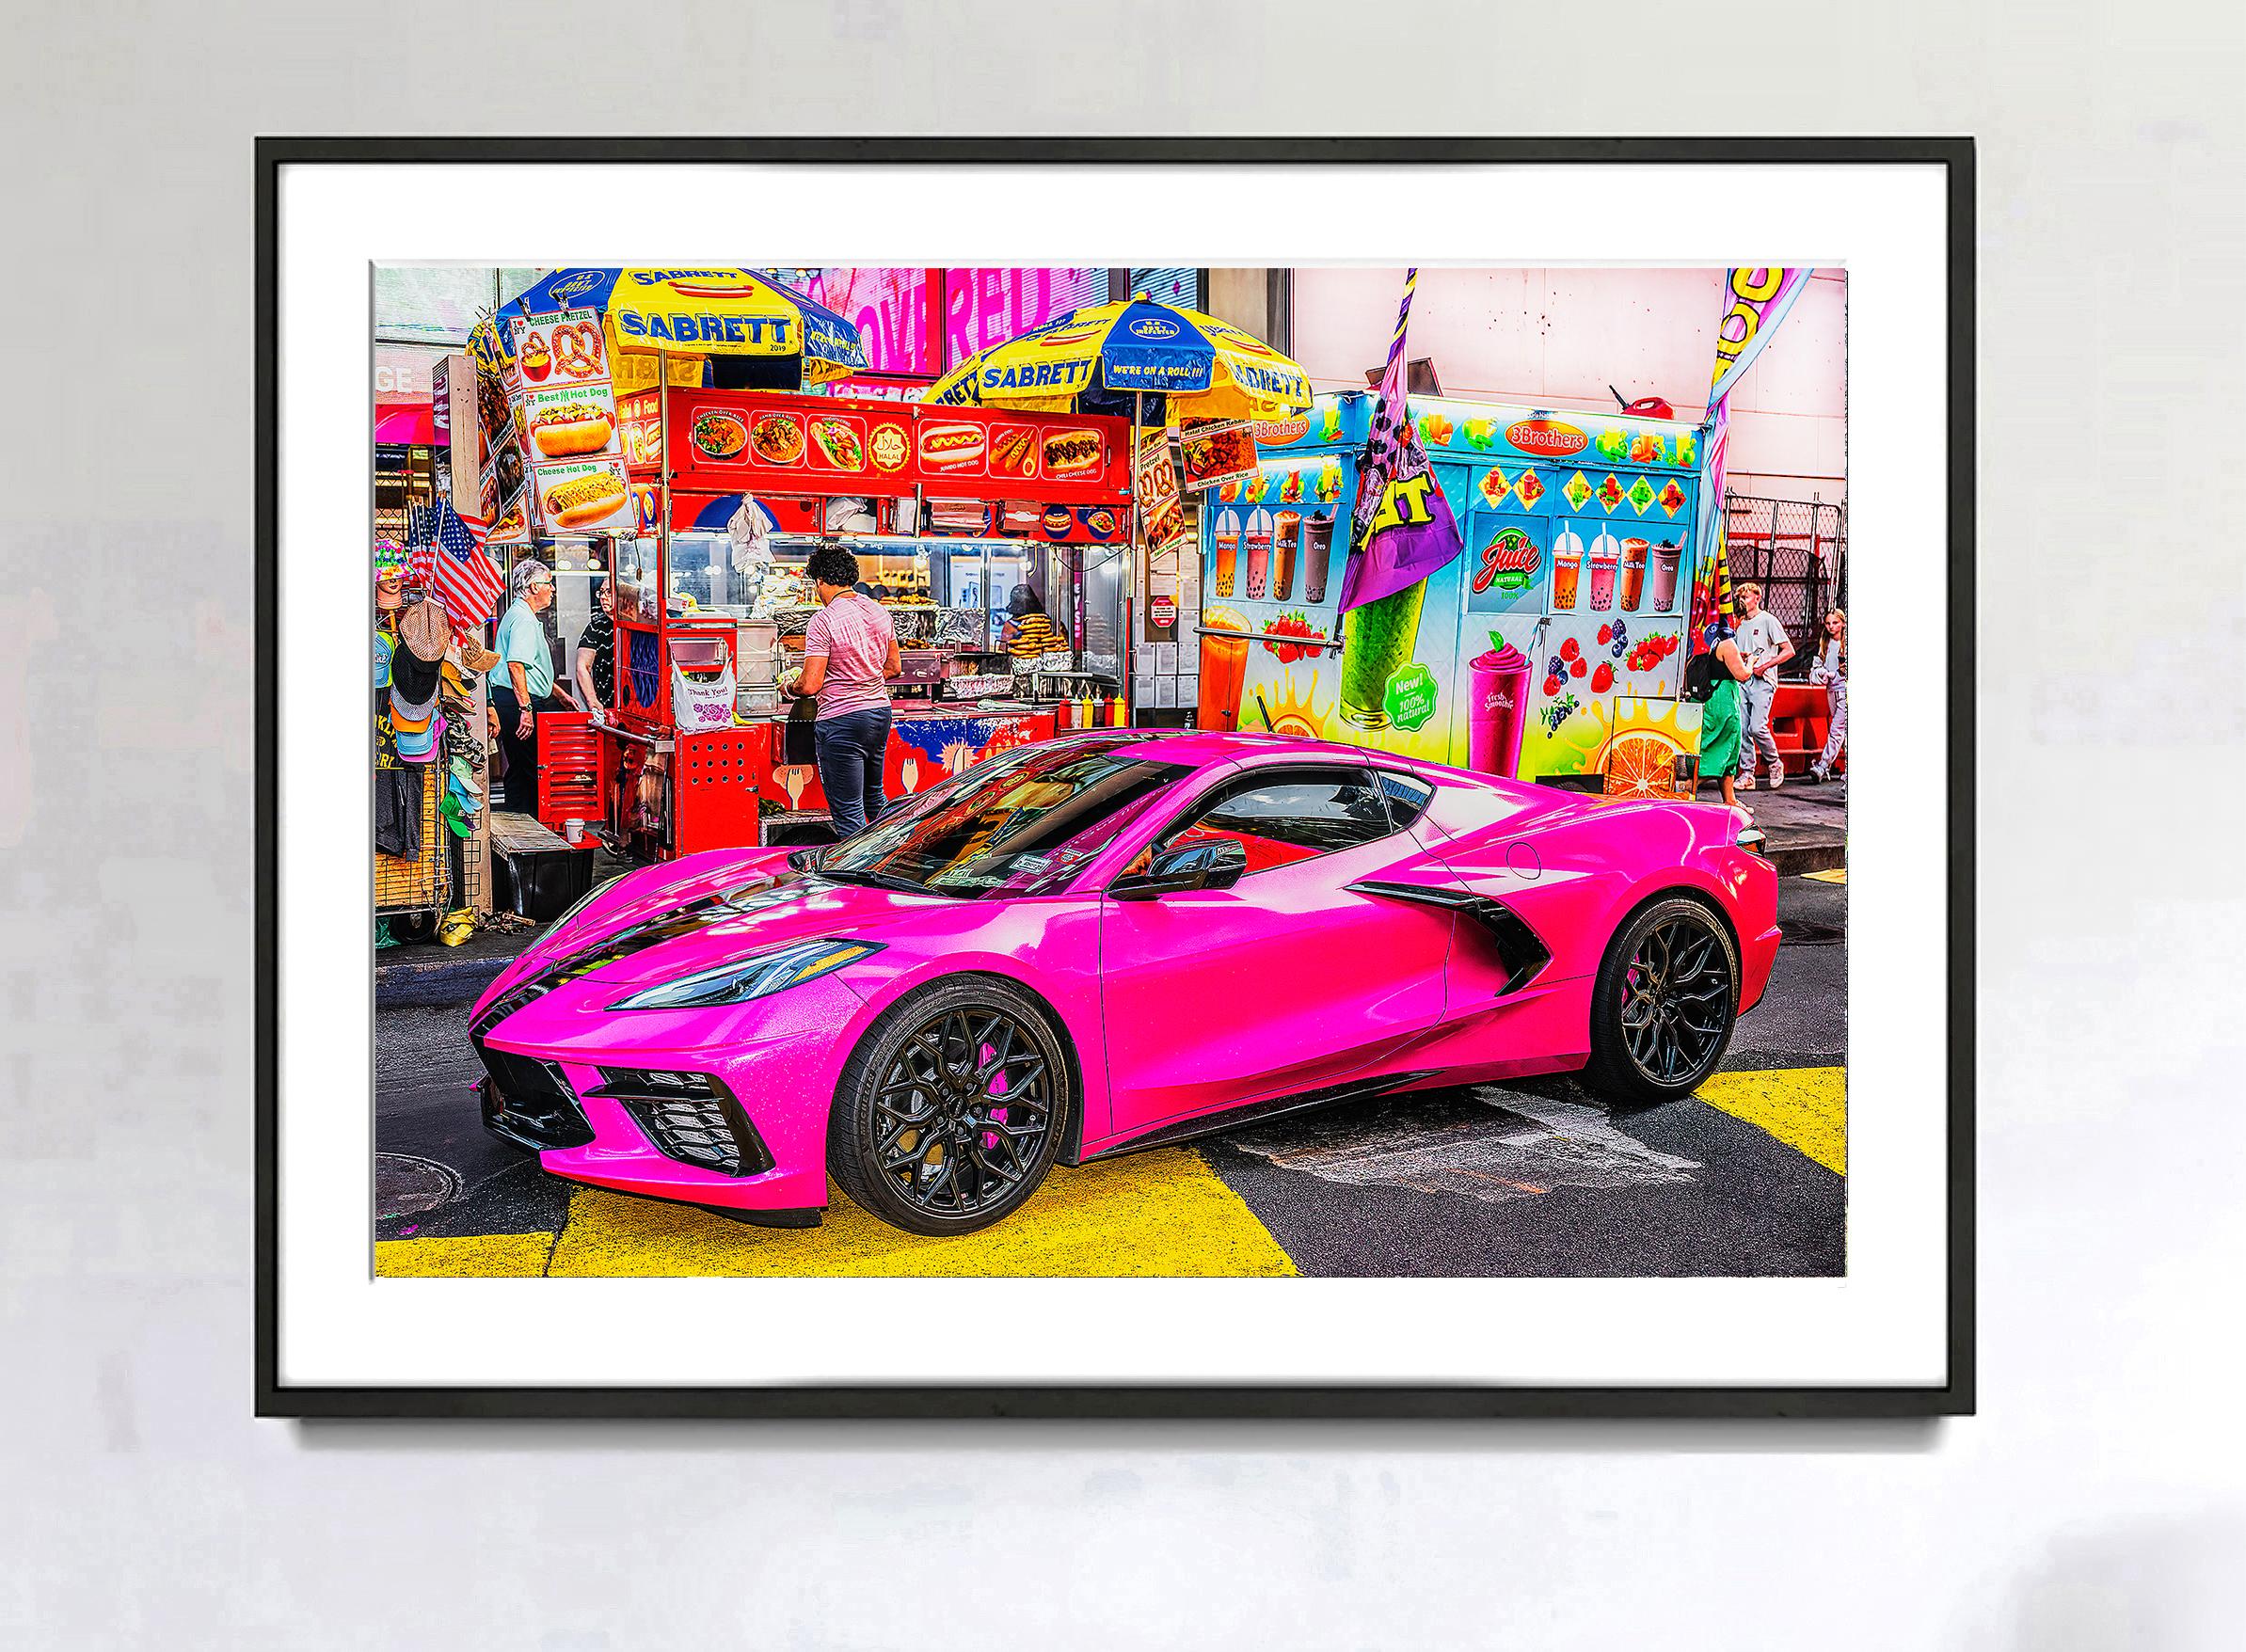 Hot Pink Hot Car in Times Square  - Automotive - Photograph by Mitchell Funk